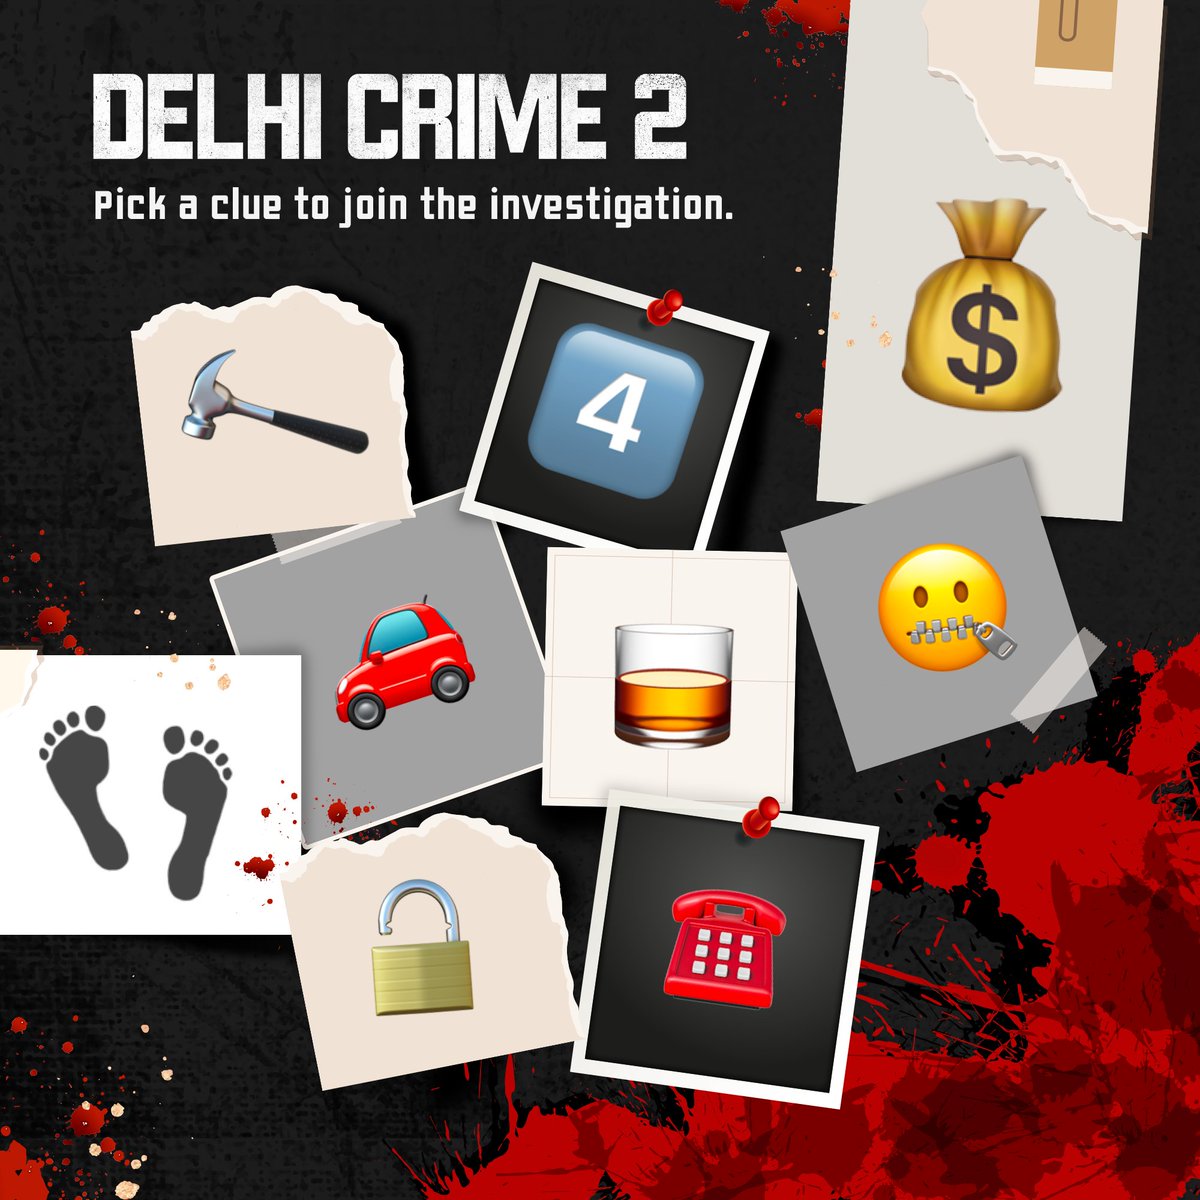 Amateur thieves or seasoned murderers - who is terrorising the capital? Help the team uncover the mystery 🔍

Reply to this tweet with one of the emoji clues below along with #DelhiCrimeSeason2 to get an insider tip.  

Delhi Crime Season 2 arrives 26th August.